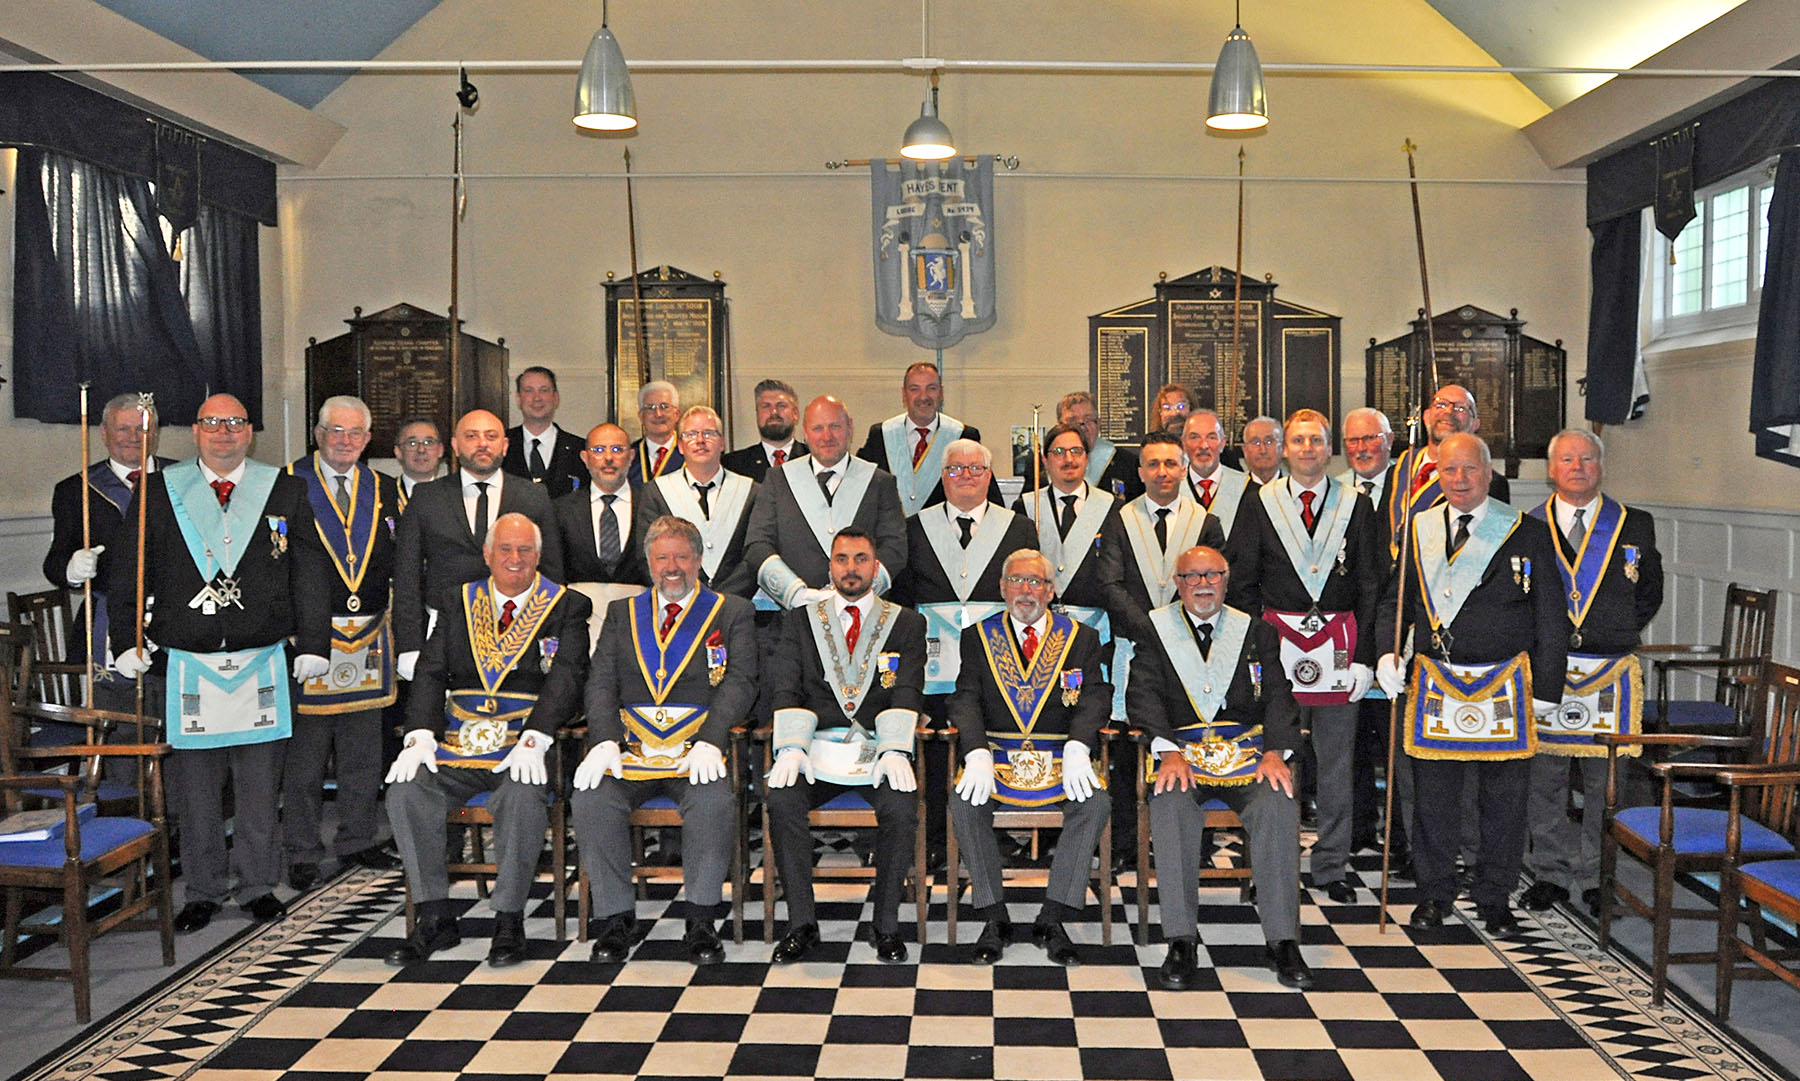 The First New Worshipful Master after lockdown